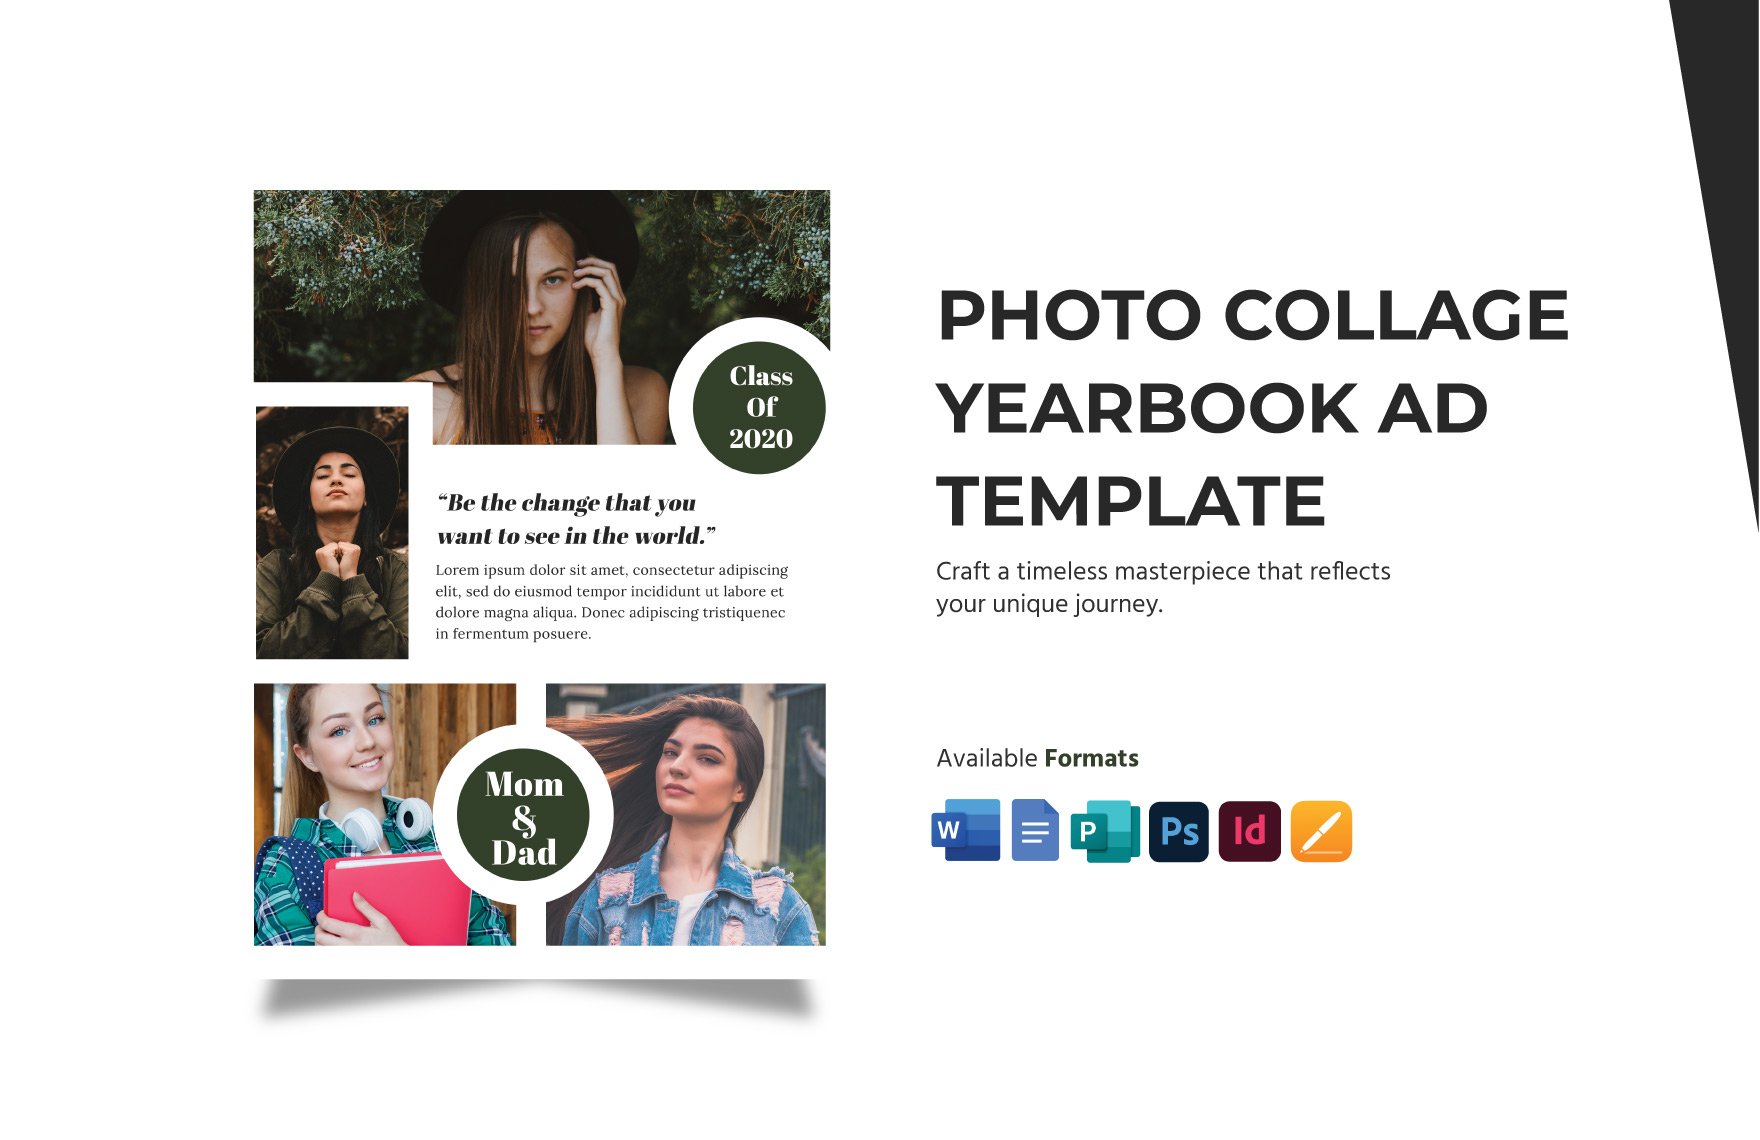 Photo Collage Yearbook Ad Template in Word, Google Docs, PSD, Apple Pages, Publisher, InDesign